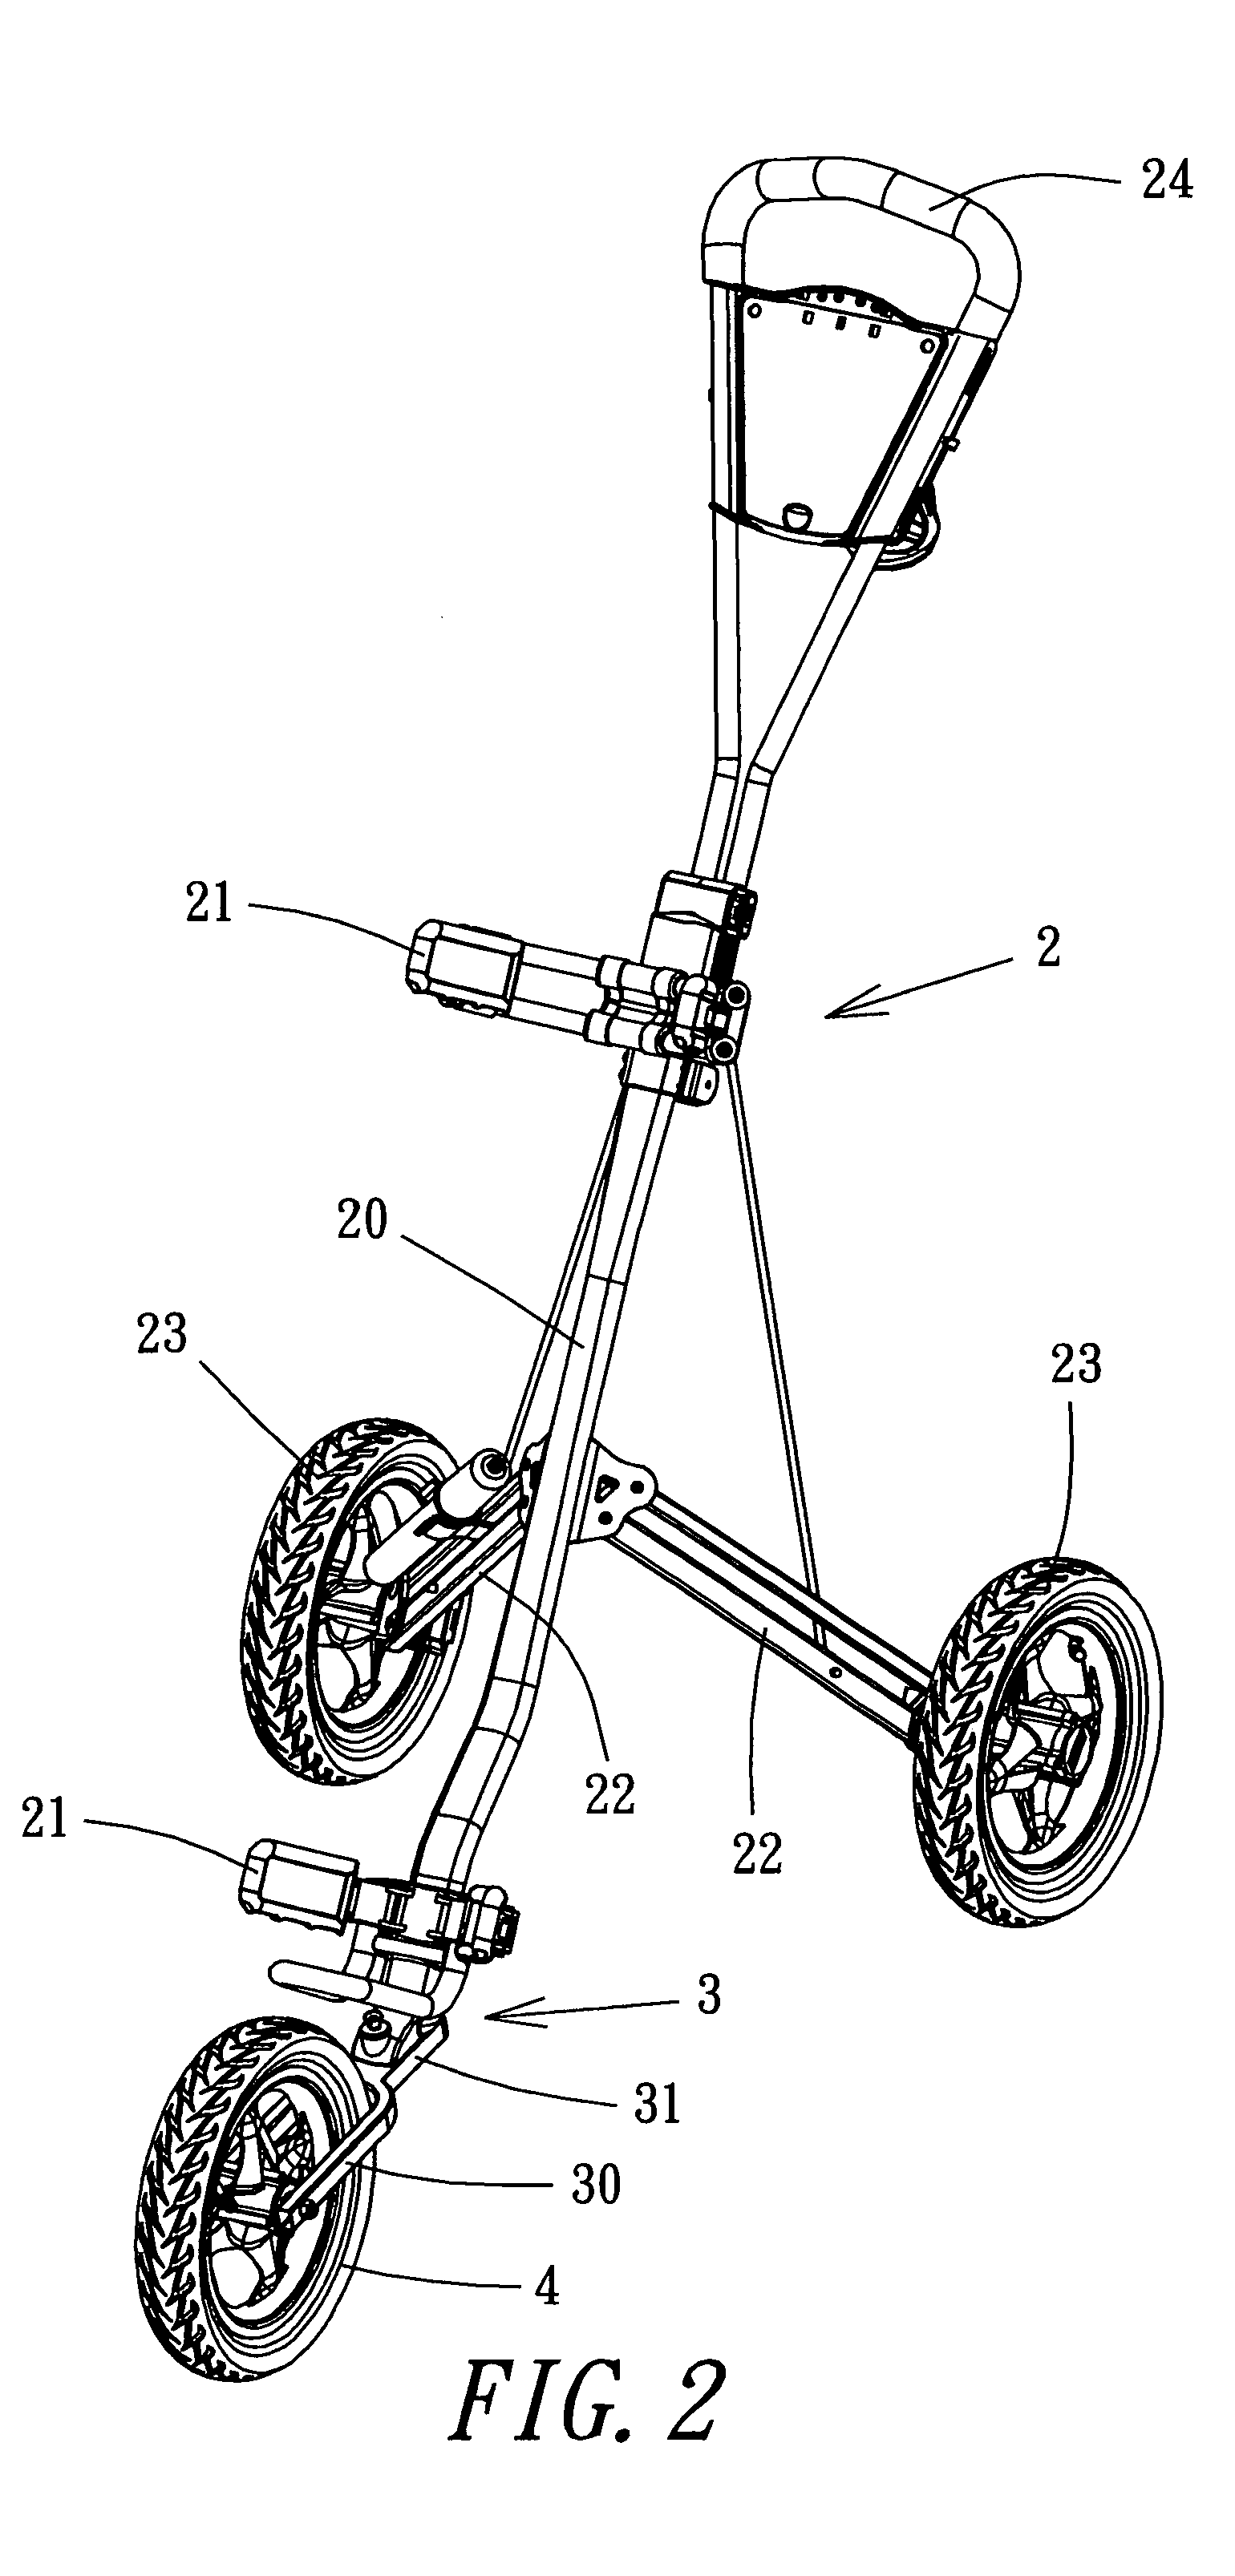 Third wheel collapsing device for a golf club cart